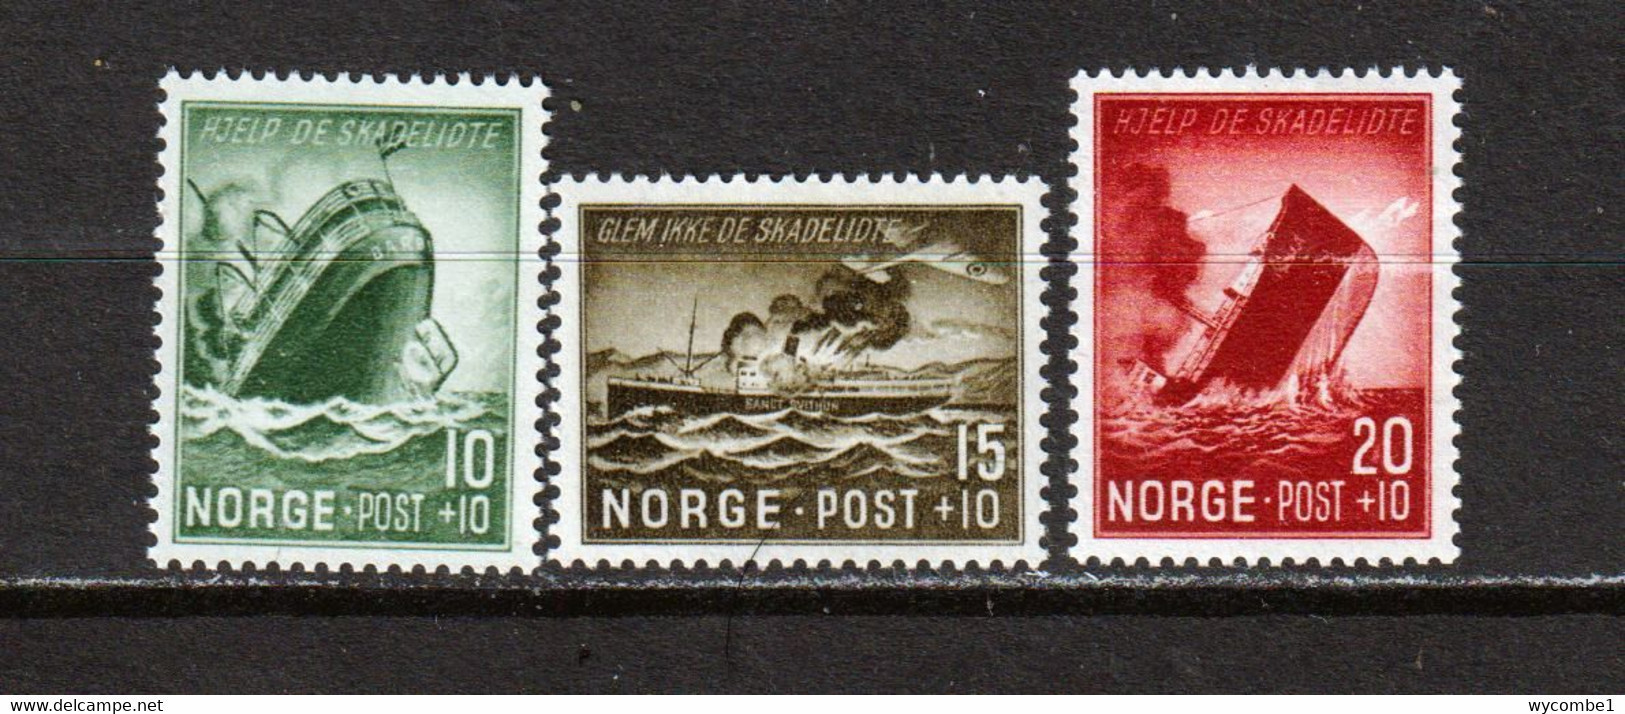 NORWAY - 1944 Mariners Relief Fund Set Unmounted Never Hinged Mint - Unused Stamps